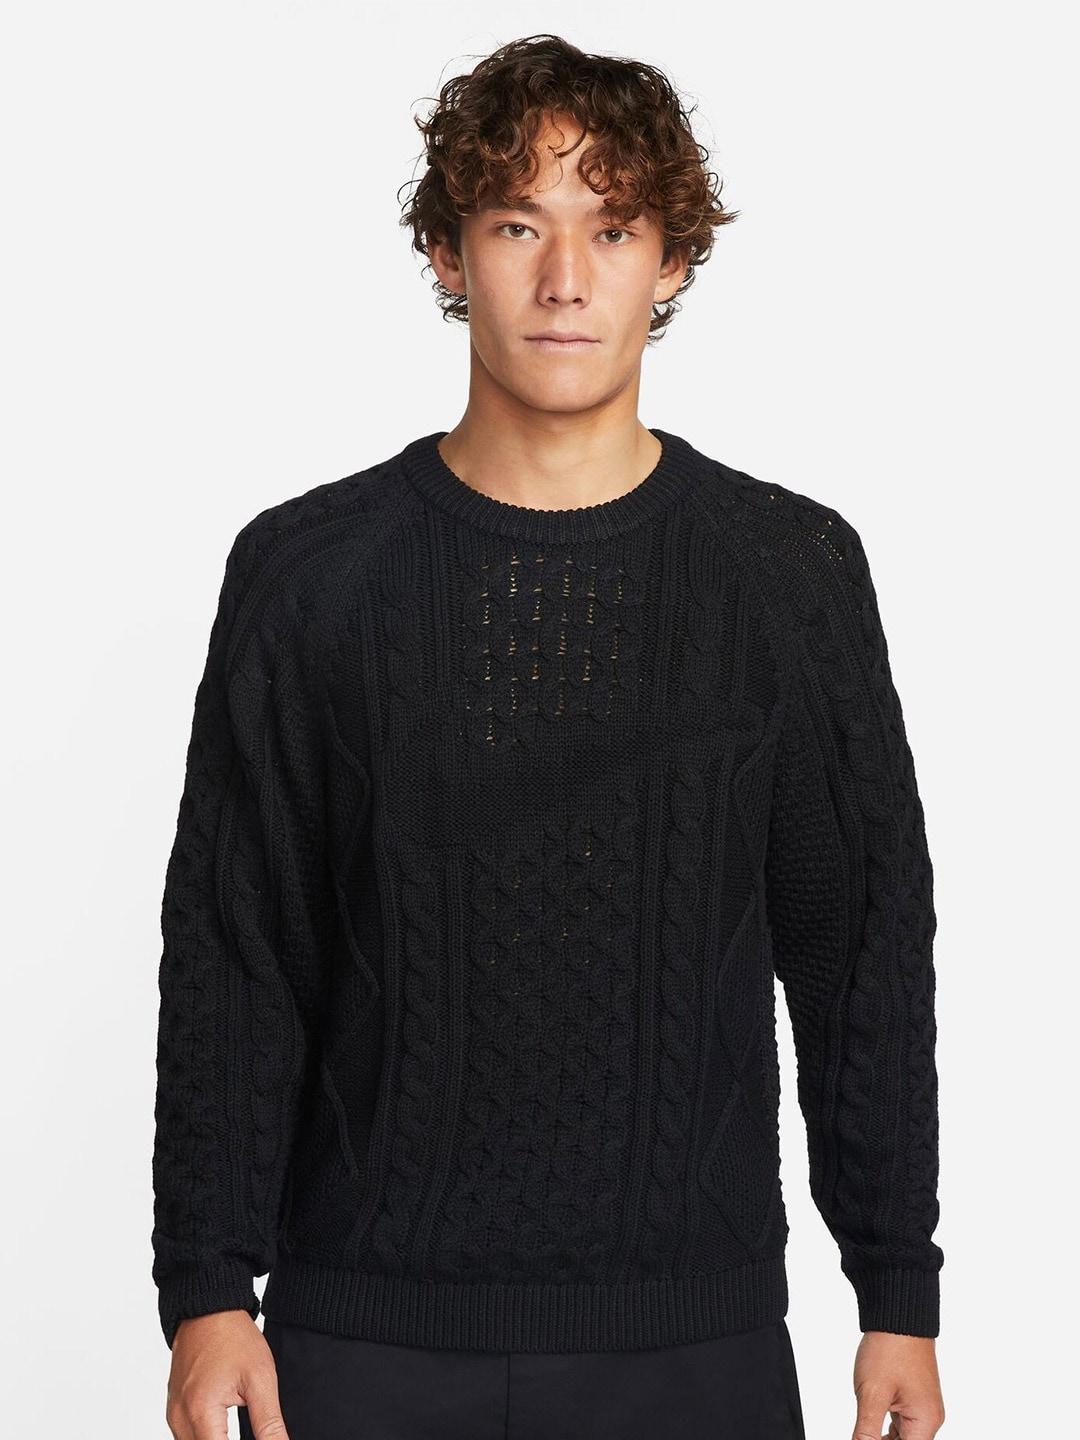 nike-sportswear-cable-knit-self-design-pullover-sweaters